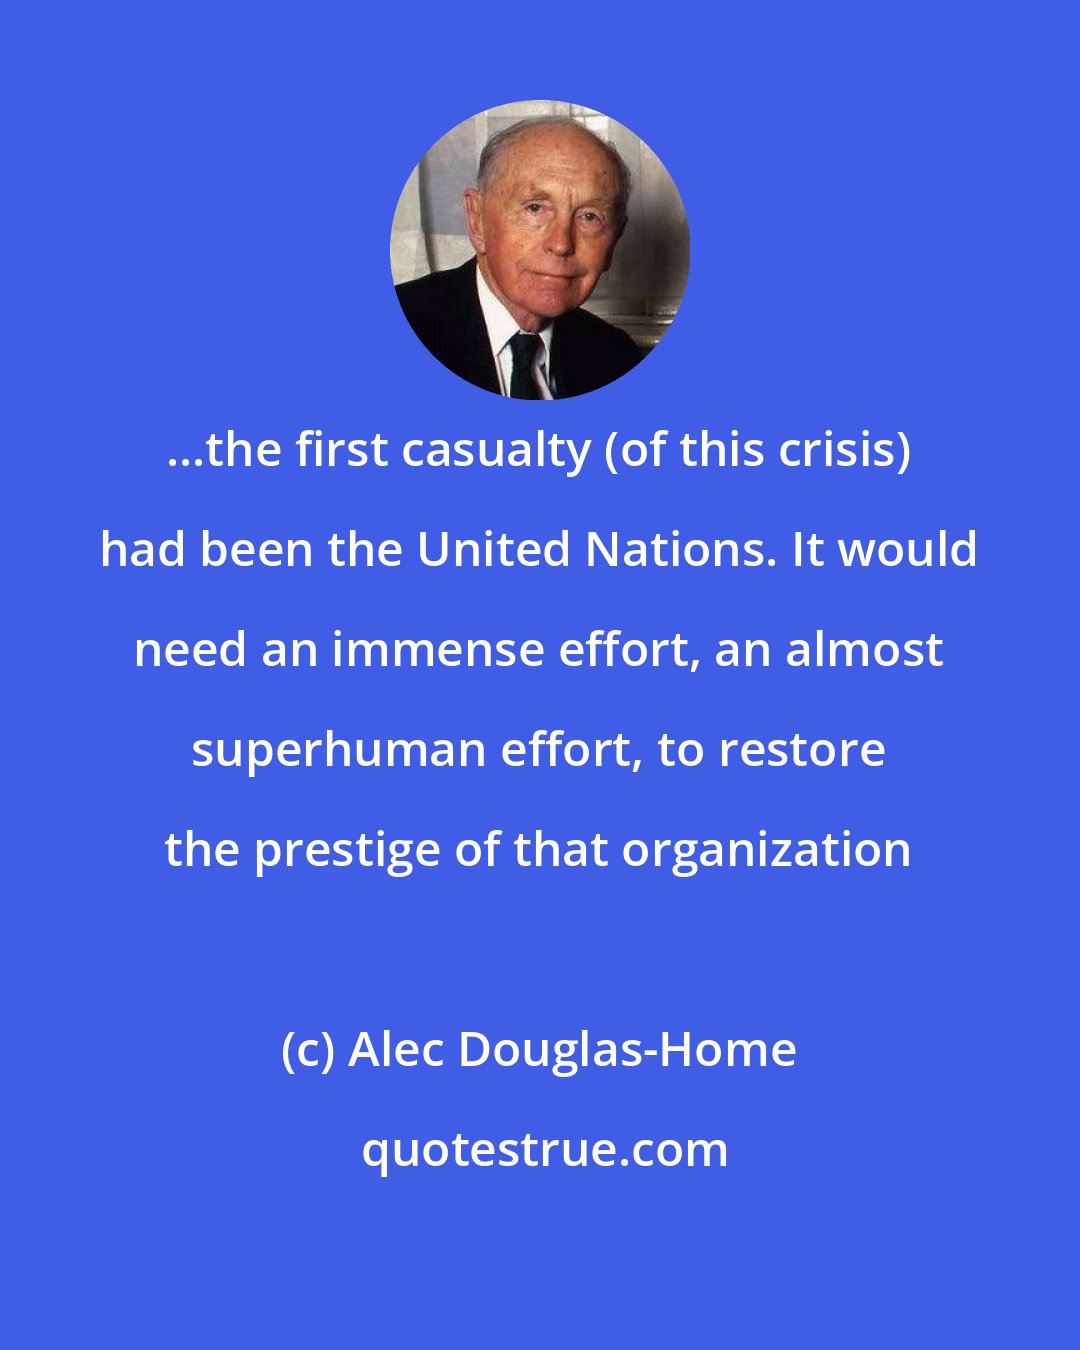 Alec Douglas-Home: ...the first casualty (of this crisis) had been the United Nations. It would need an immense effort, an almost superhuman effort, to restore the prestige of that organization